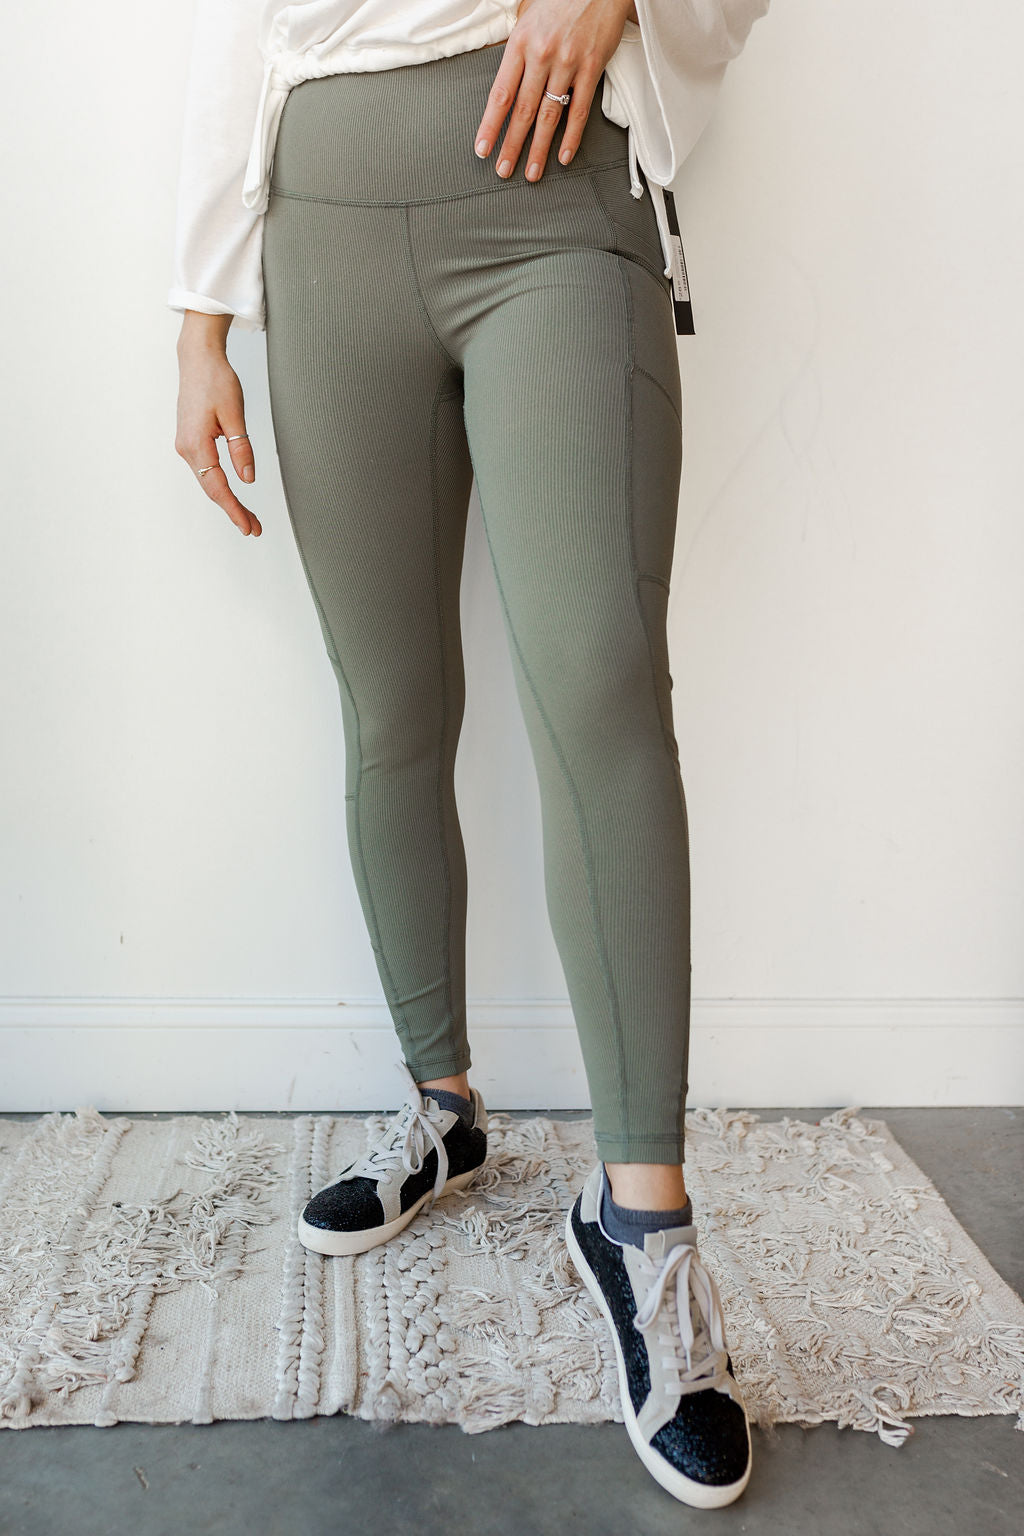 ribbed legging with pockets